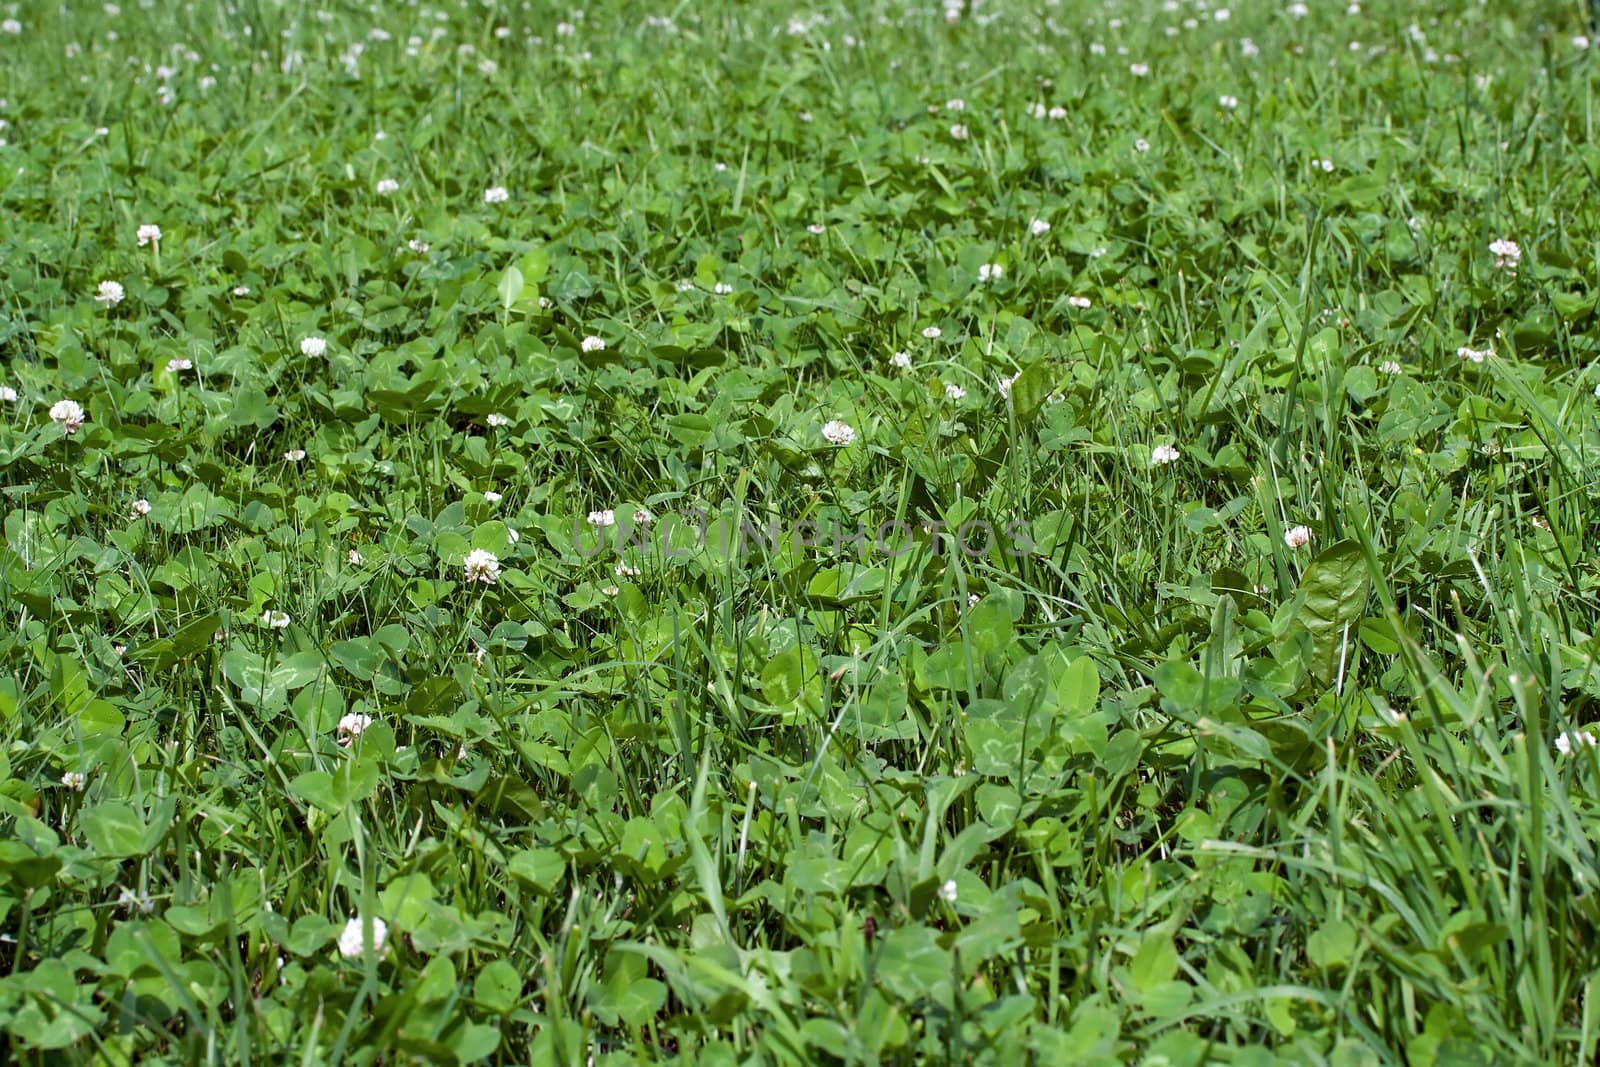 Trifolium repens, the white clover also known as Dutch clover, background